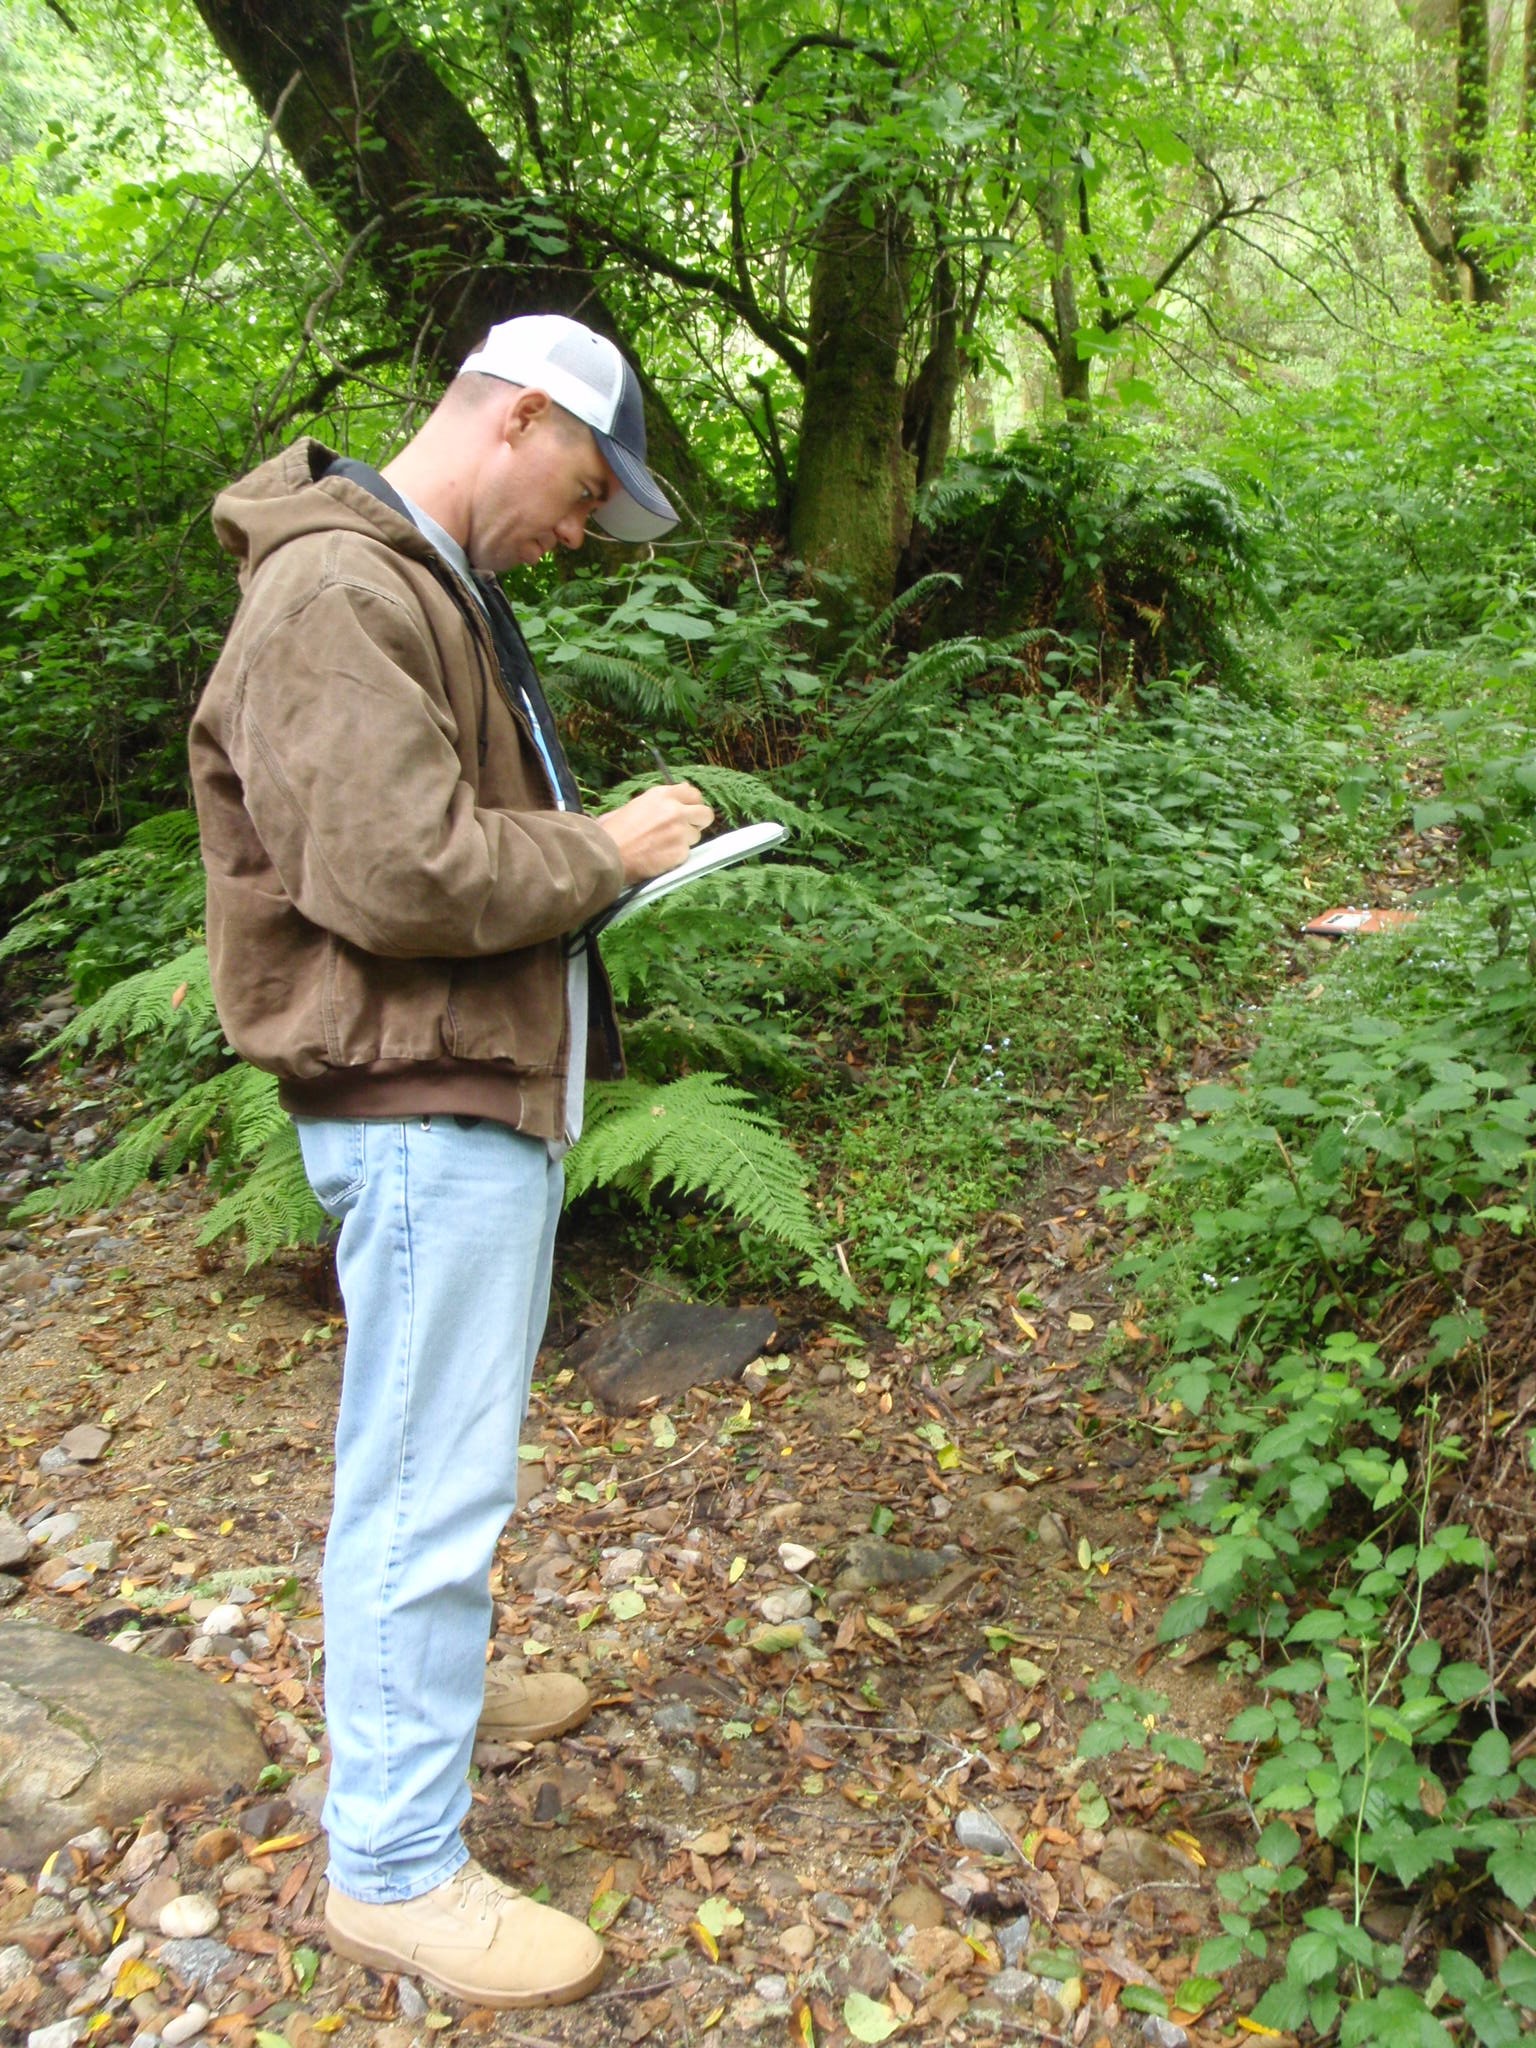 MAJ Frank Harmon takes field notes in the Santa Cruz Mountains, CA before collecting GPS data and LiDAR points